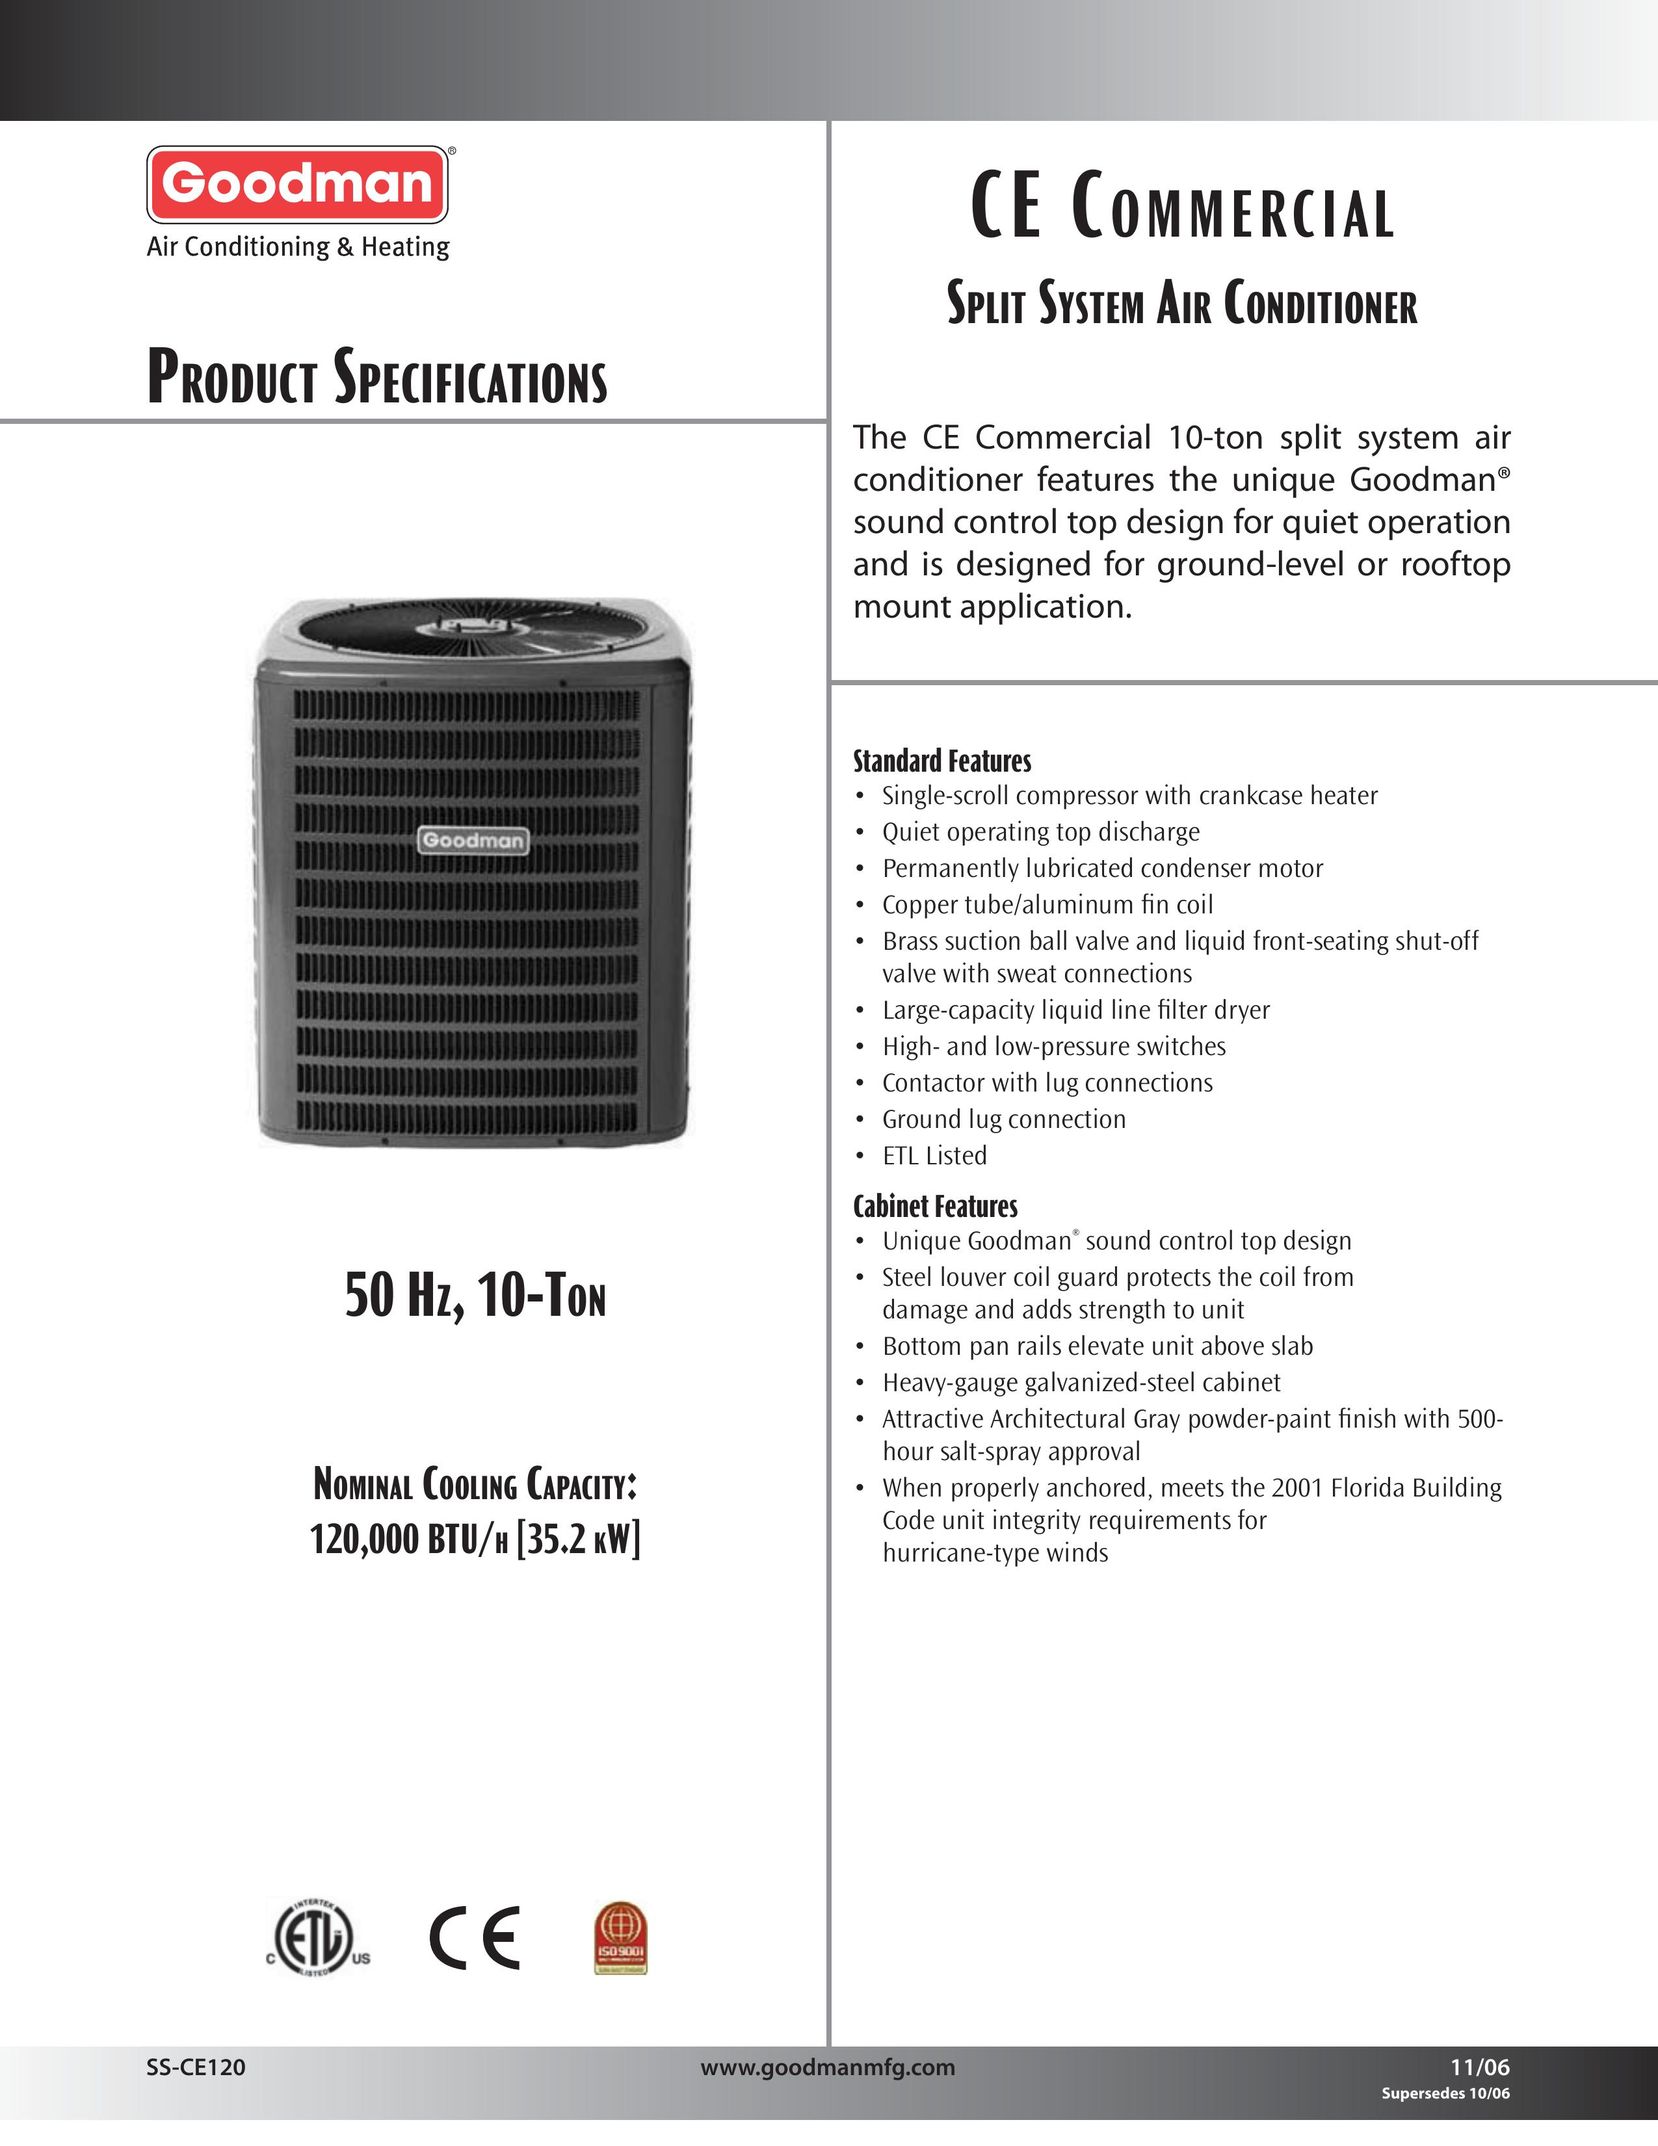 Goodman Mfg CE COMMERCIAL SPLIT SYSTEM AIR CONDITIONER Air Conditioner User Manual